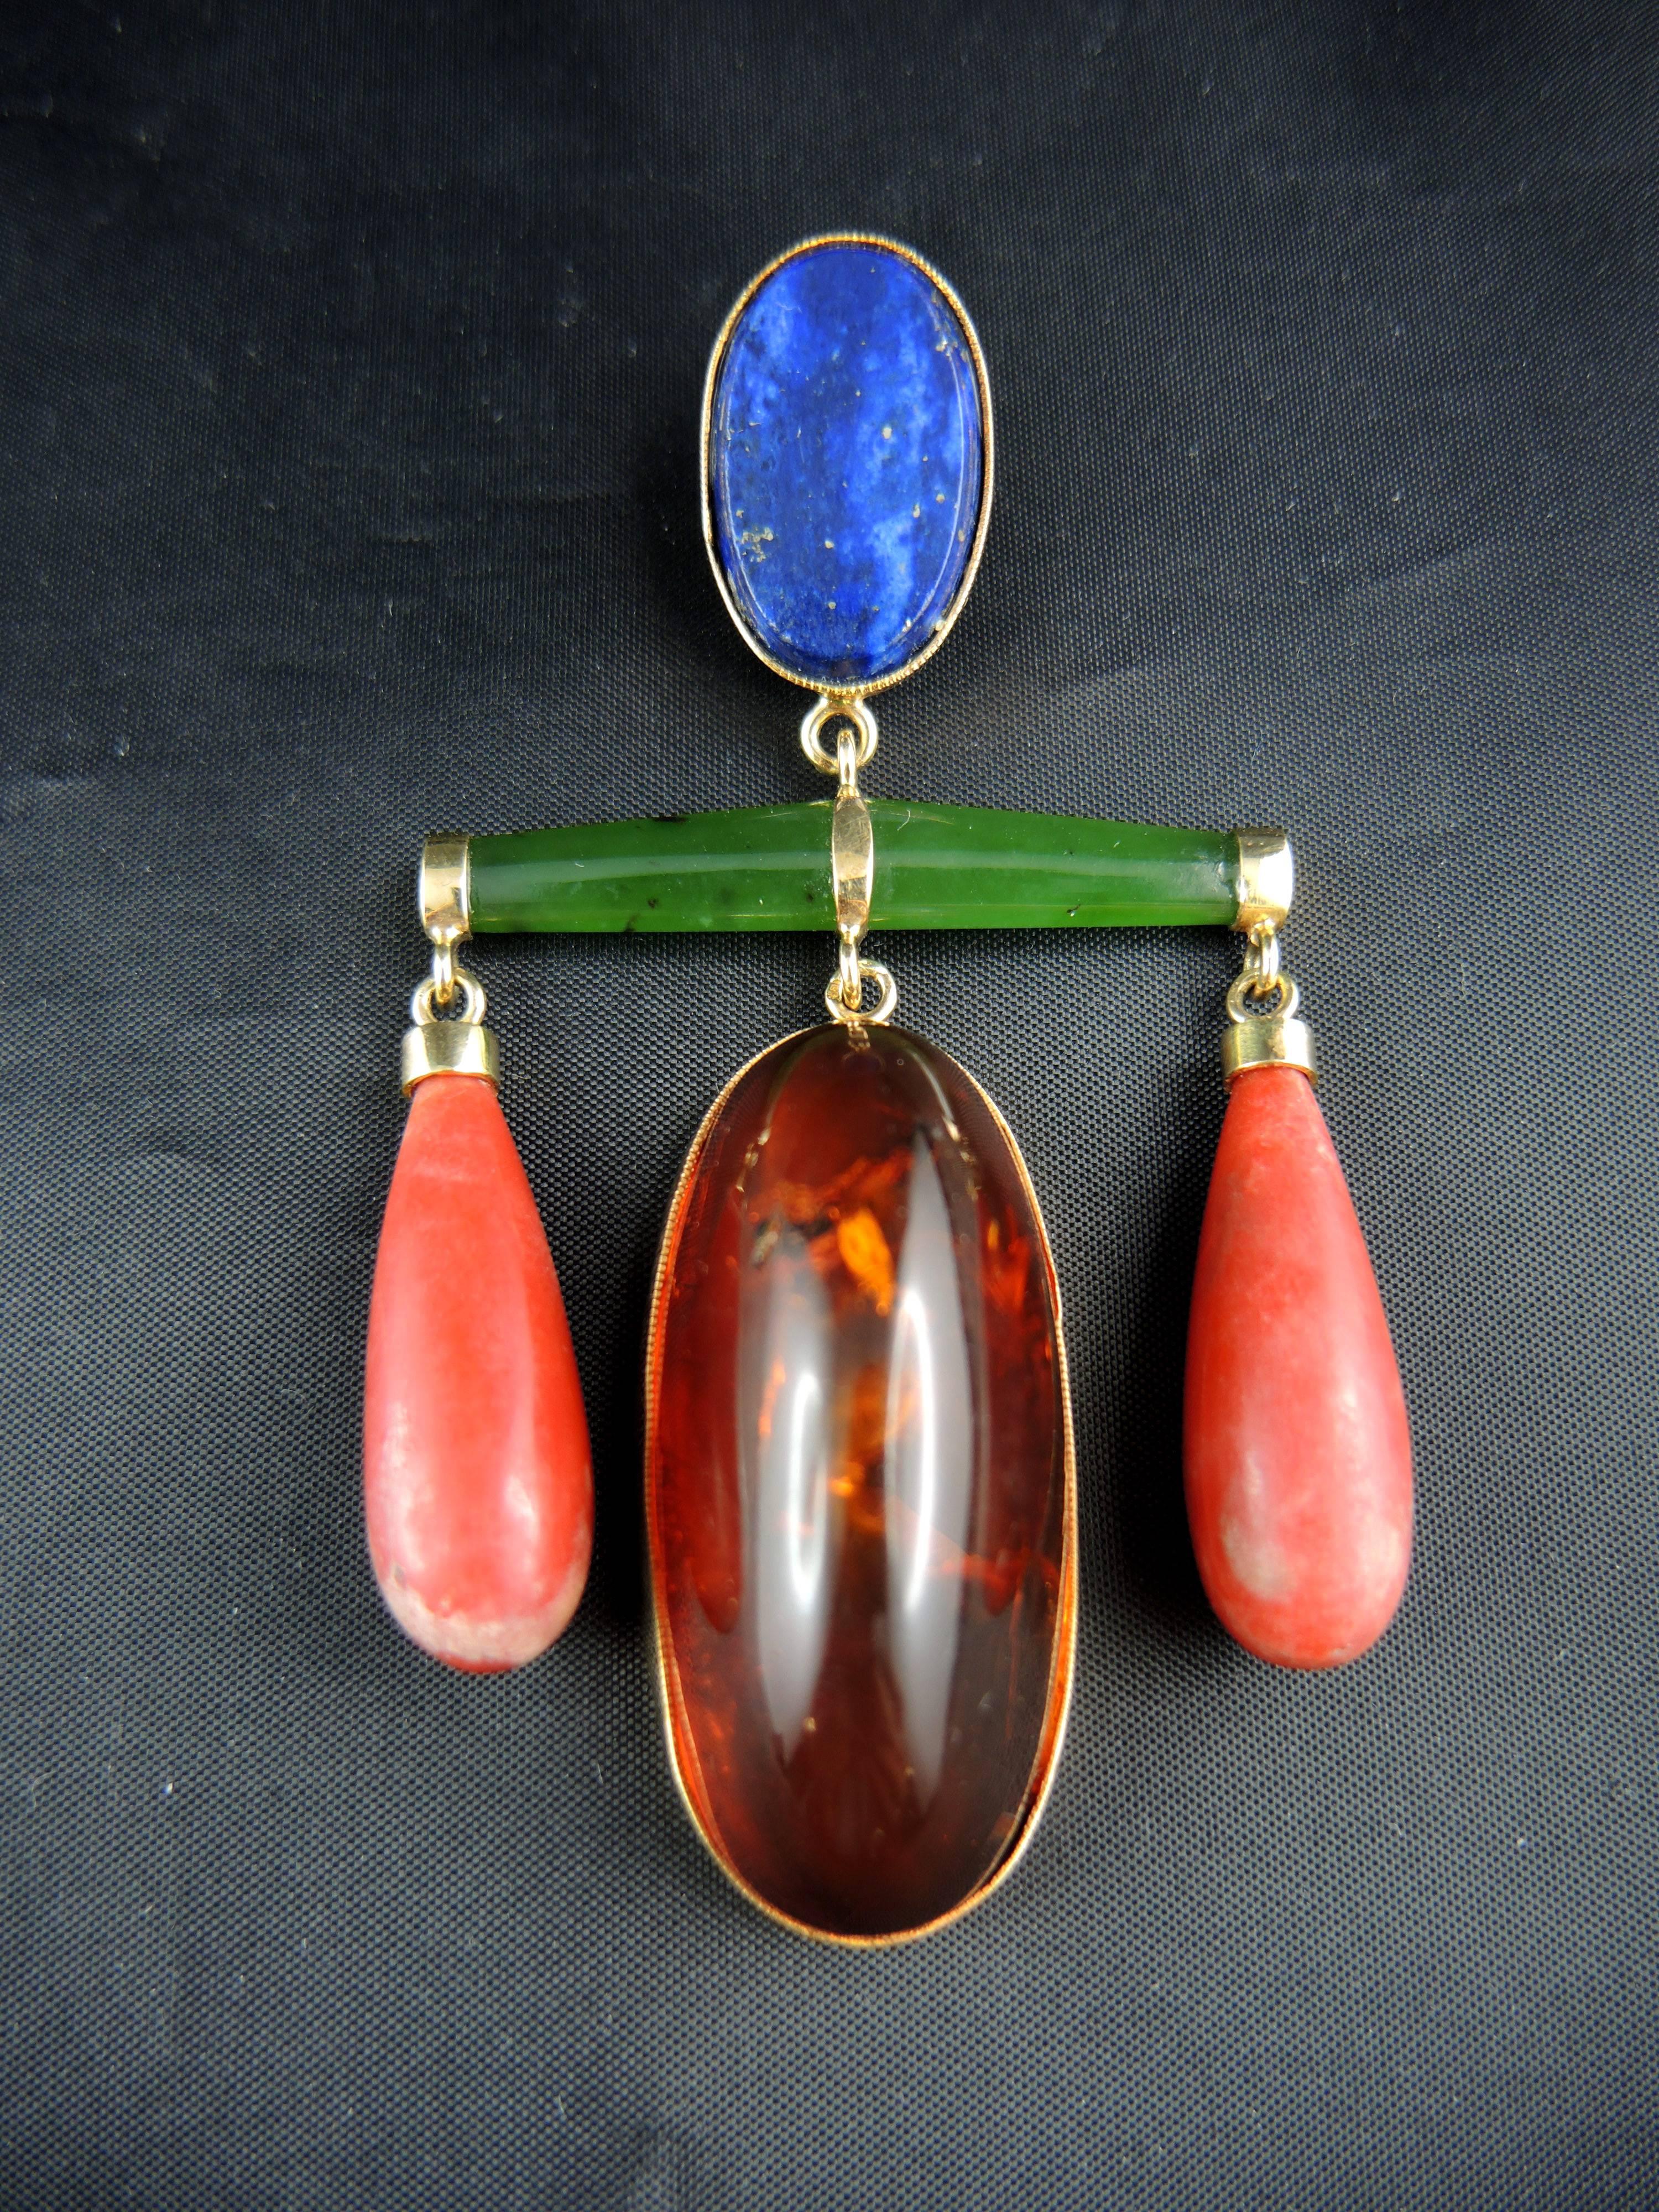 18 kt yellow gold pendant (quality mark: eagle's head), set a lapis lazuli, two coral drops, an amber cabochon, and jade.
Sold without the chain.

French Modernist work, circa 1960.

Weight:10.00g
Height: 8.00 cm